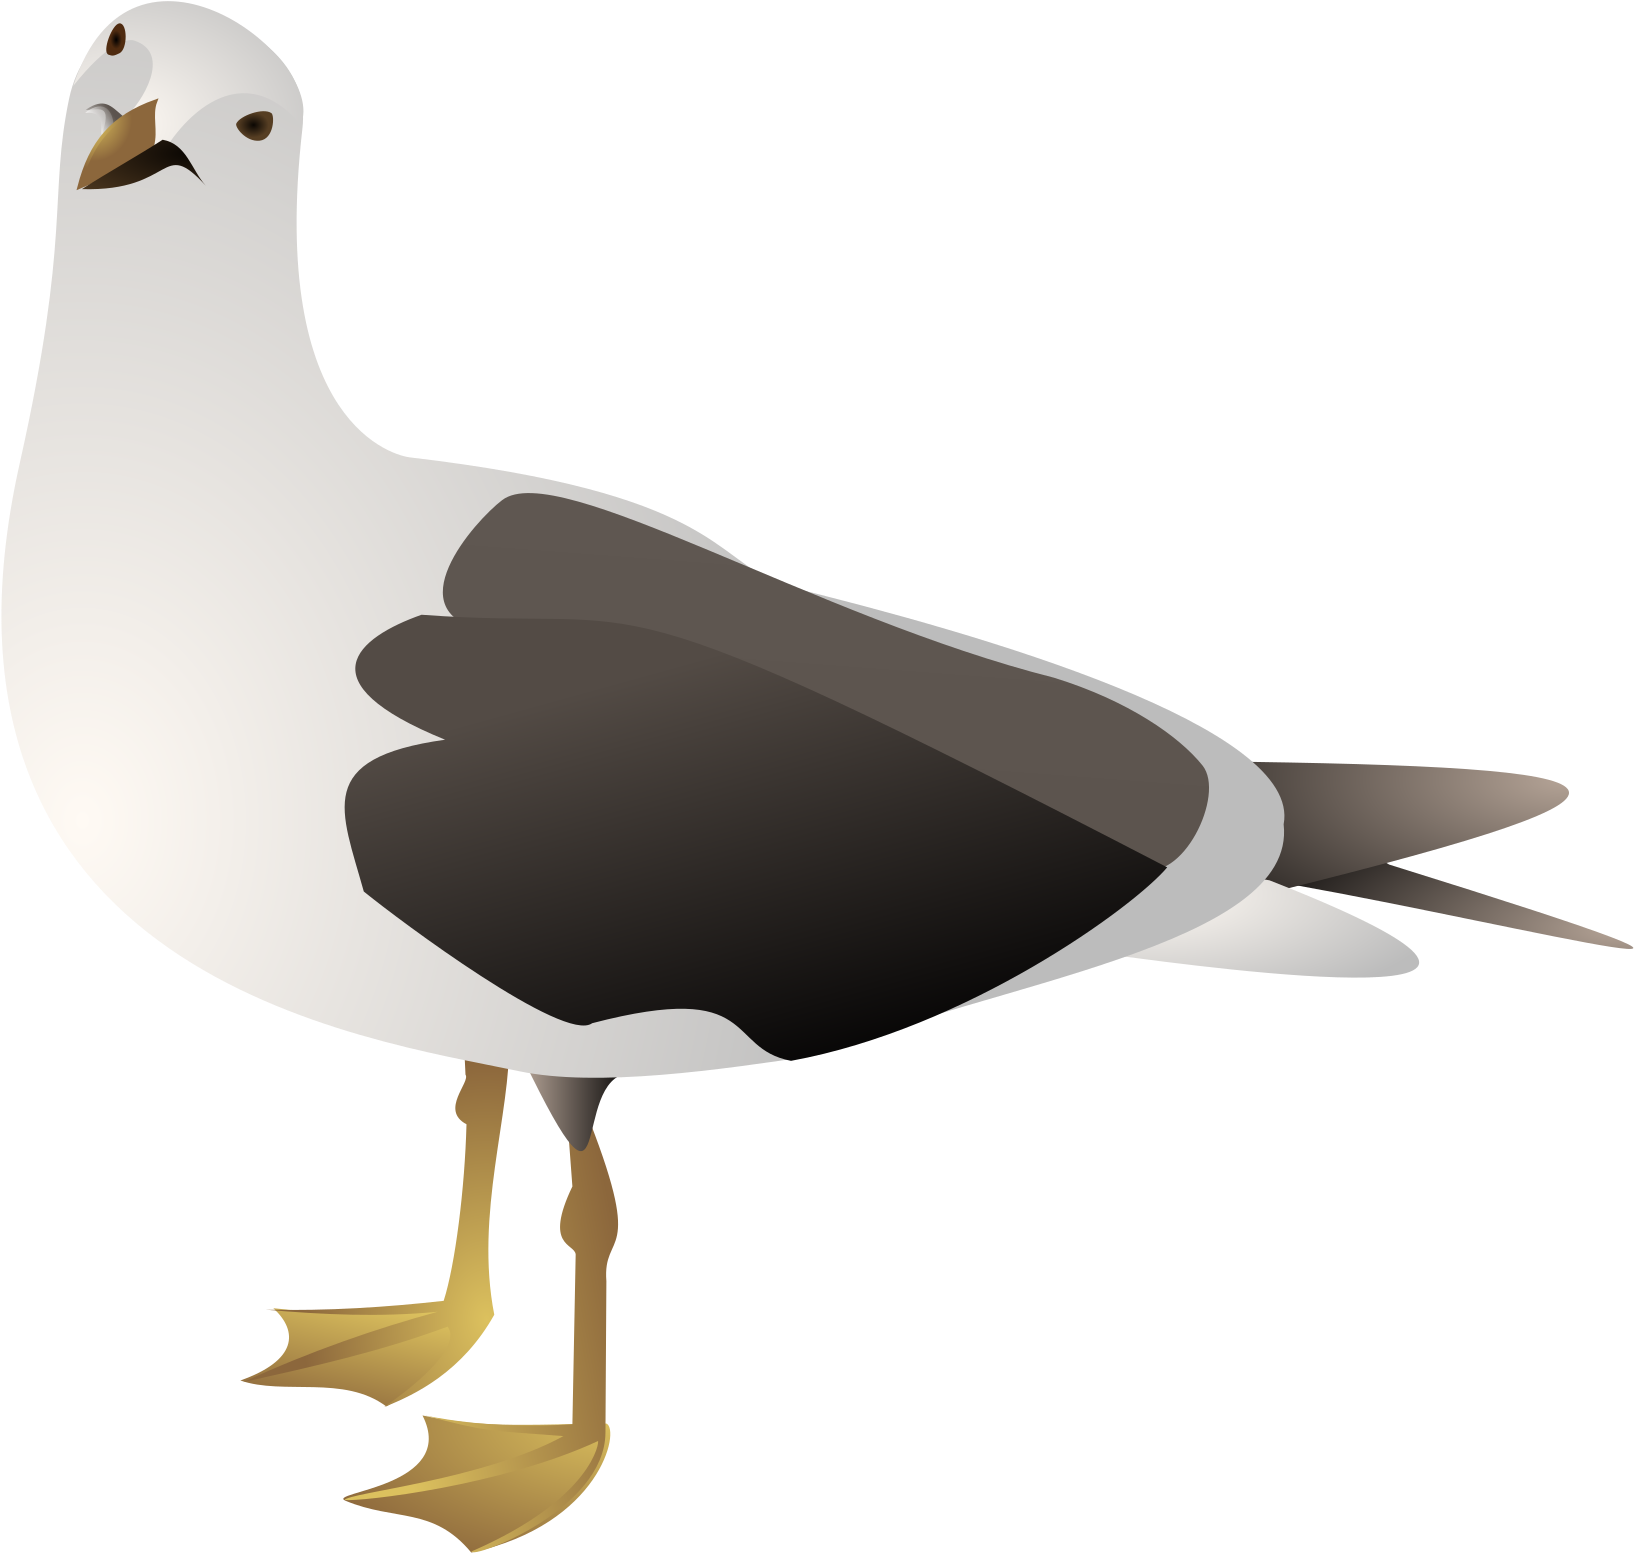 Illustrated Seagull Graphic